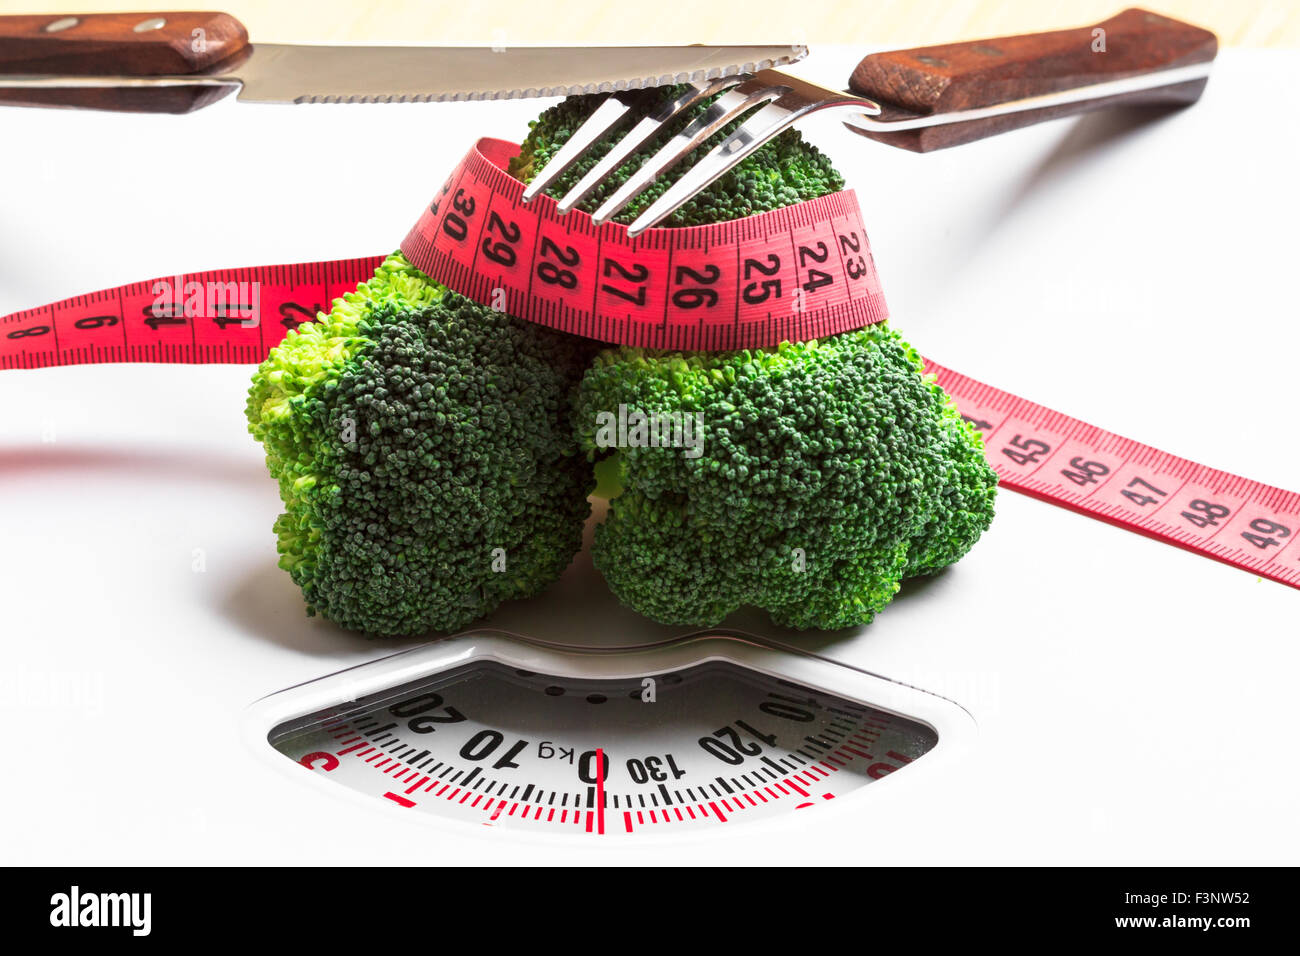 Diet healthy eating weight control concept. Closeup green broccoli measuring tape and fork knife on white scales Stock Photo